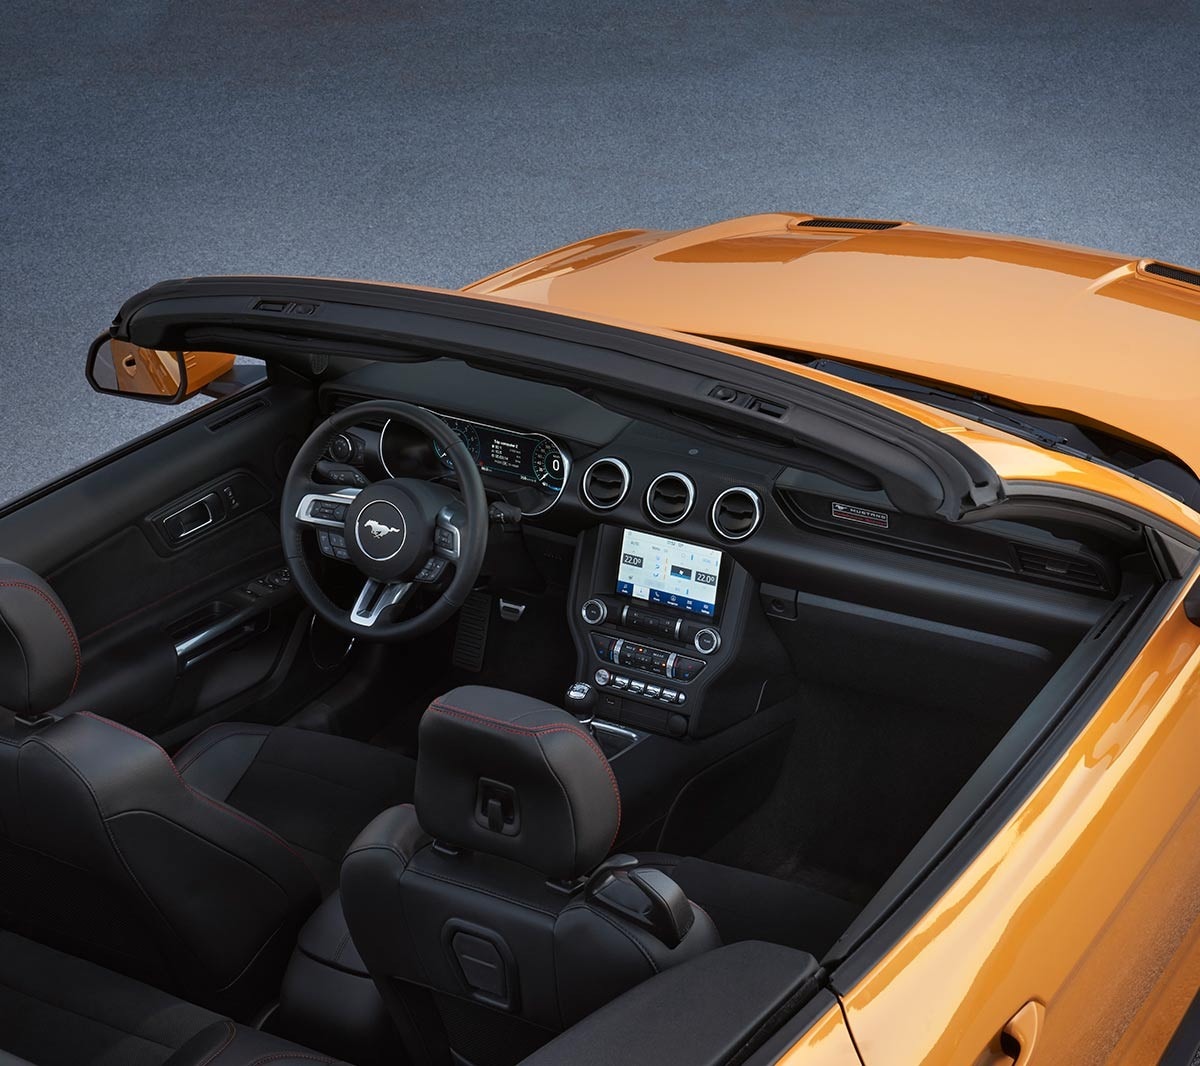 Ford Mustang California Edition interior dashboard design viewed from above.